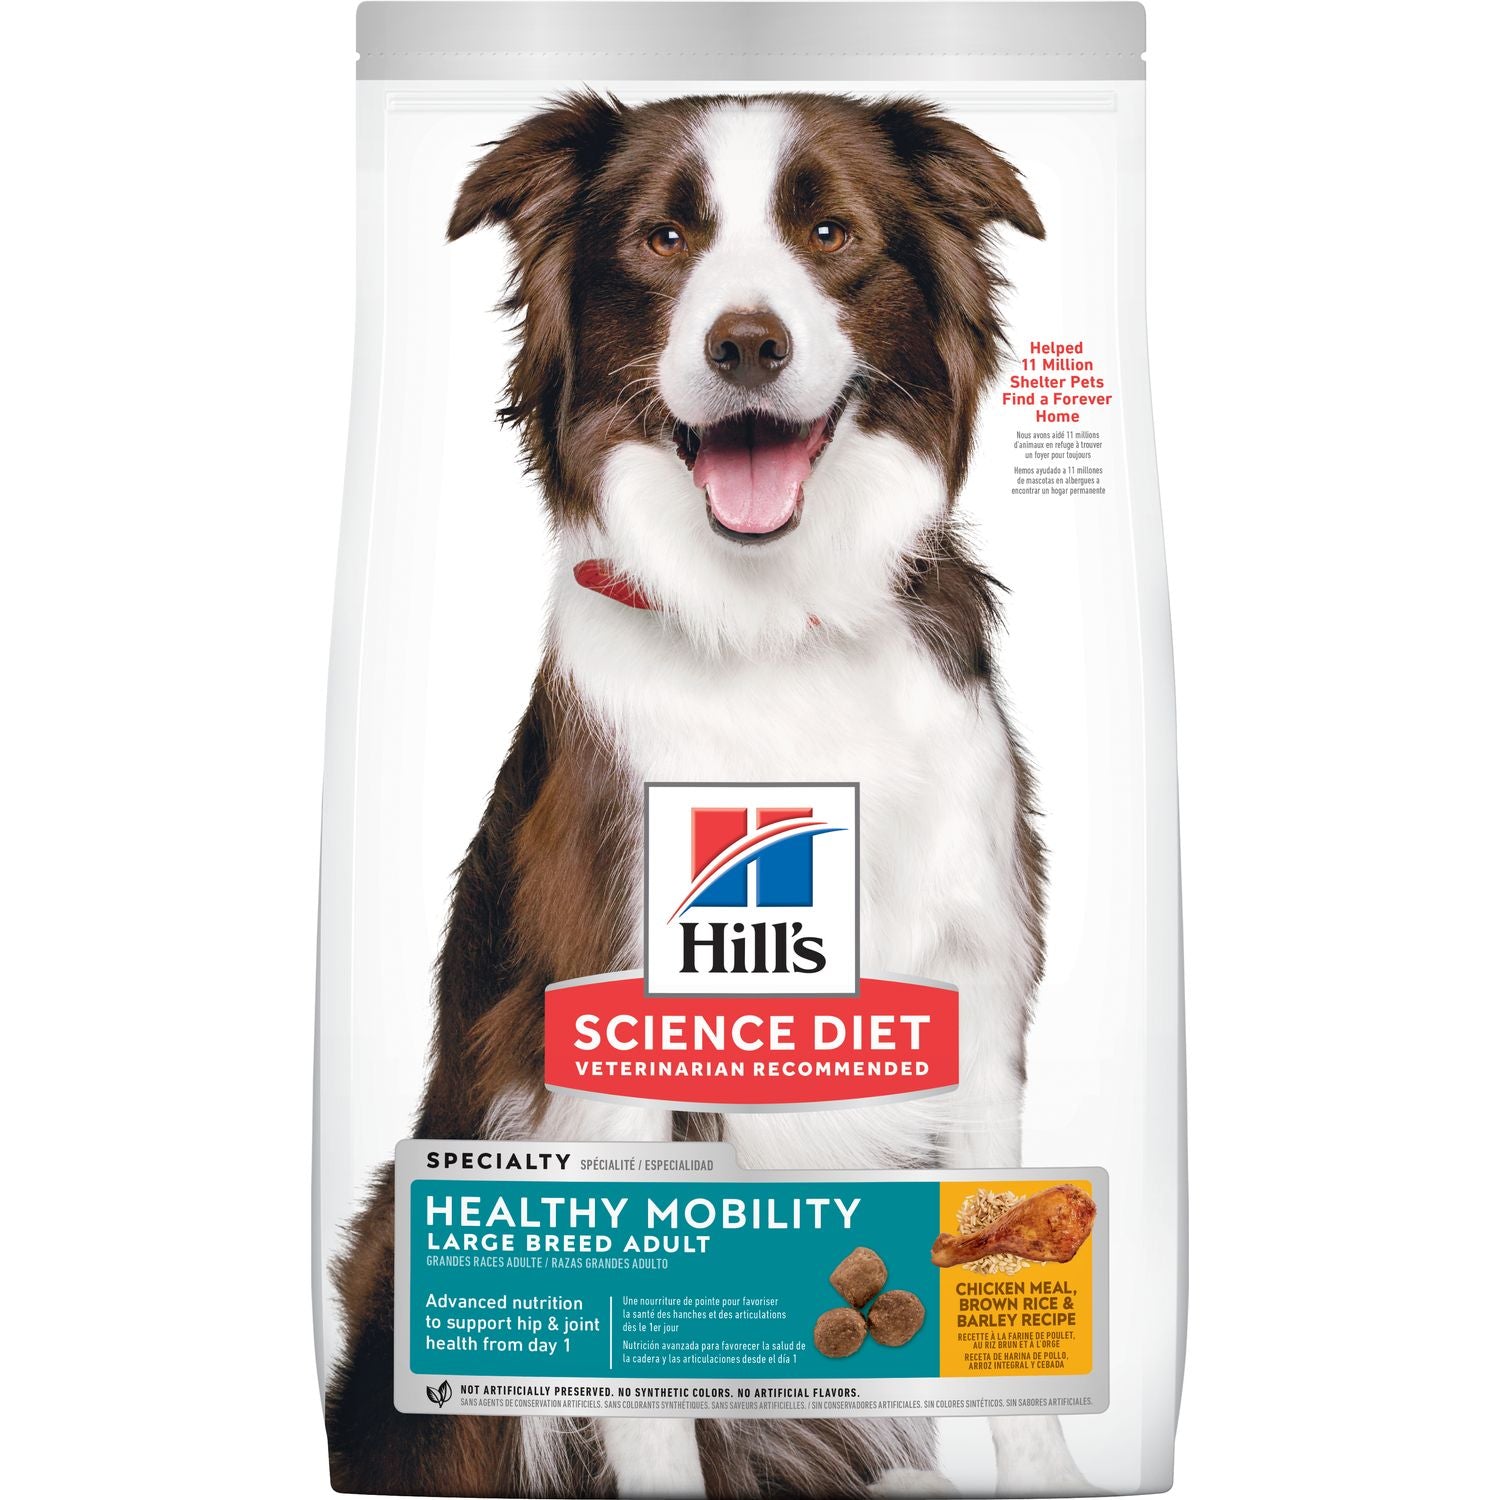 Hill's Science Diet Dry Dog Food, Adult, Large Breed, Healthy Mobility for Joint Health, Chicken Meal, Brown Rice & Barley Recipe, 30 lb. Bag  Dog Food  | PetMax Canada